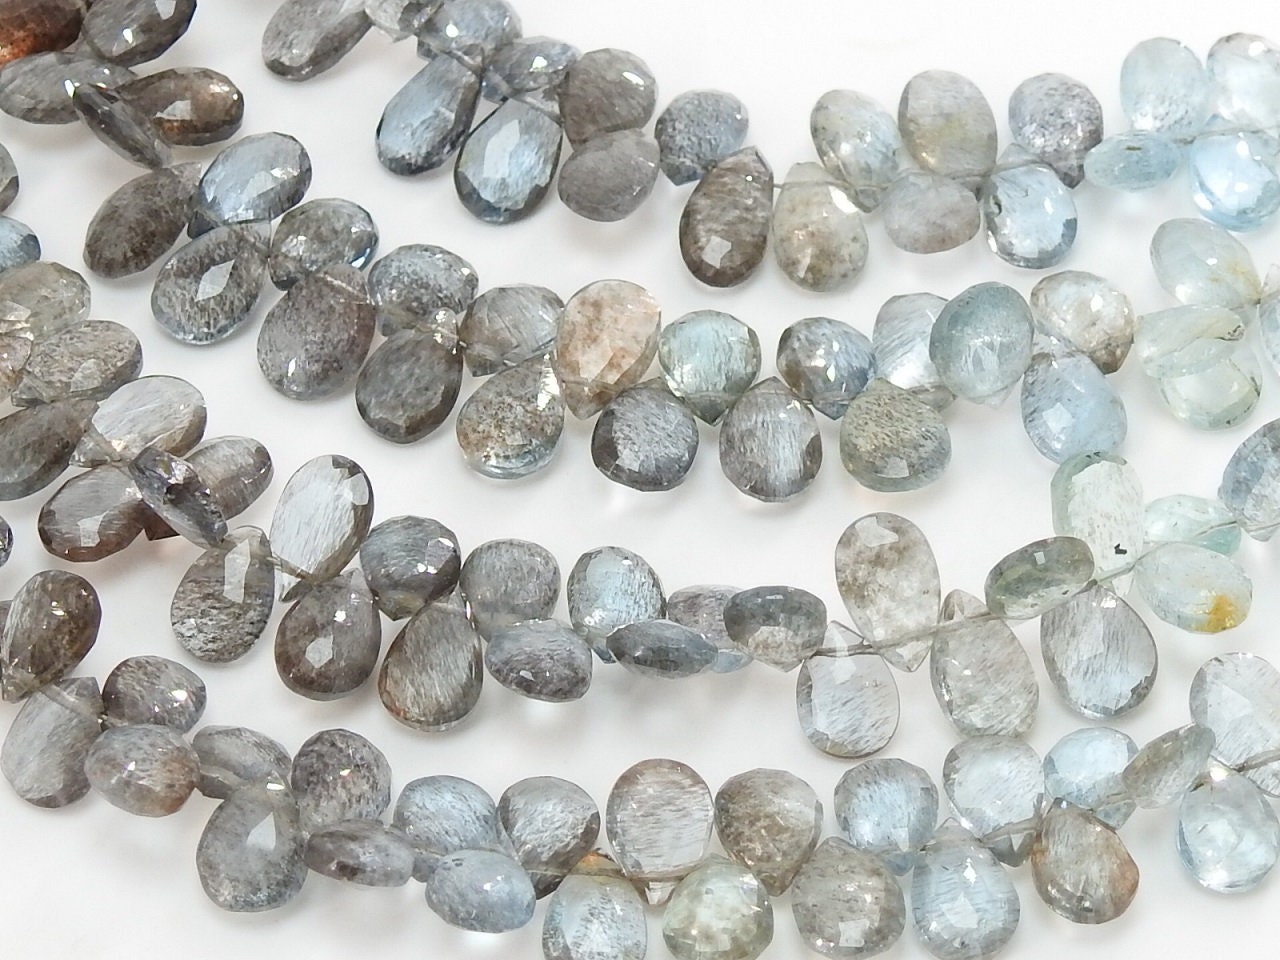 Moss Aquamarine Faceted Teardrop,Multi Shaded,Loose Bead 8Inch 9X6To8X5MM Approx Wholesale Price,New Arrival,100%Natural BB(BR4) | Save 33% - Rajasthan Living 13